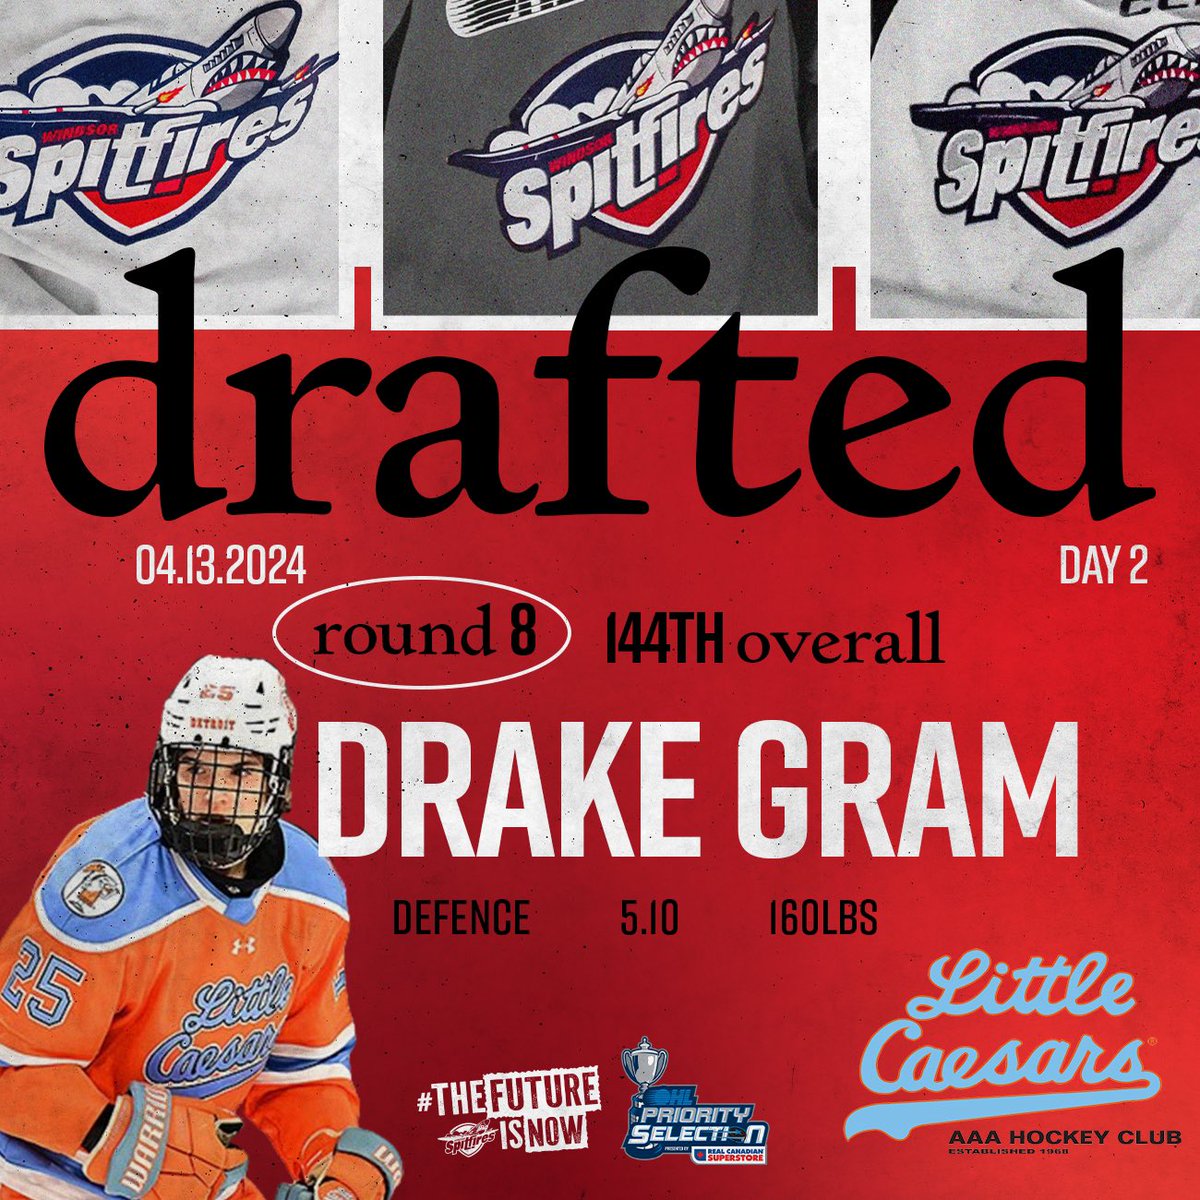 With the 144th overall pick in the 2024 OHL Priority Selection, the Windsor Spitfires are proud to select Drake Gram from the Detroit Little Caesars team! #WindsorSpitfires #OHLDraft